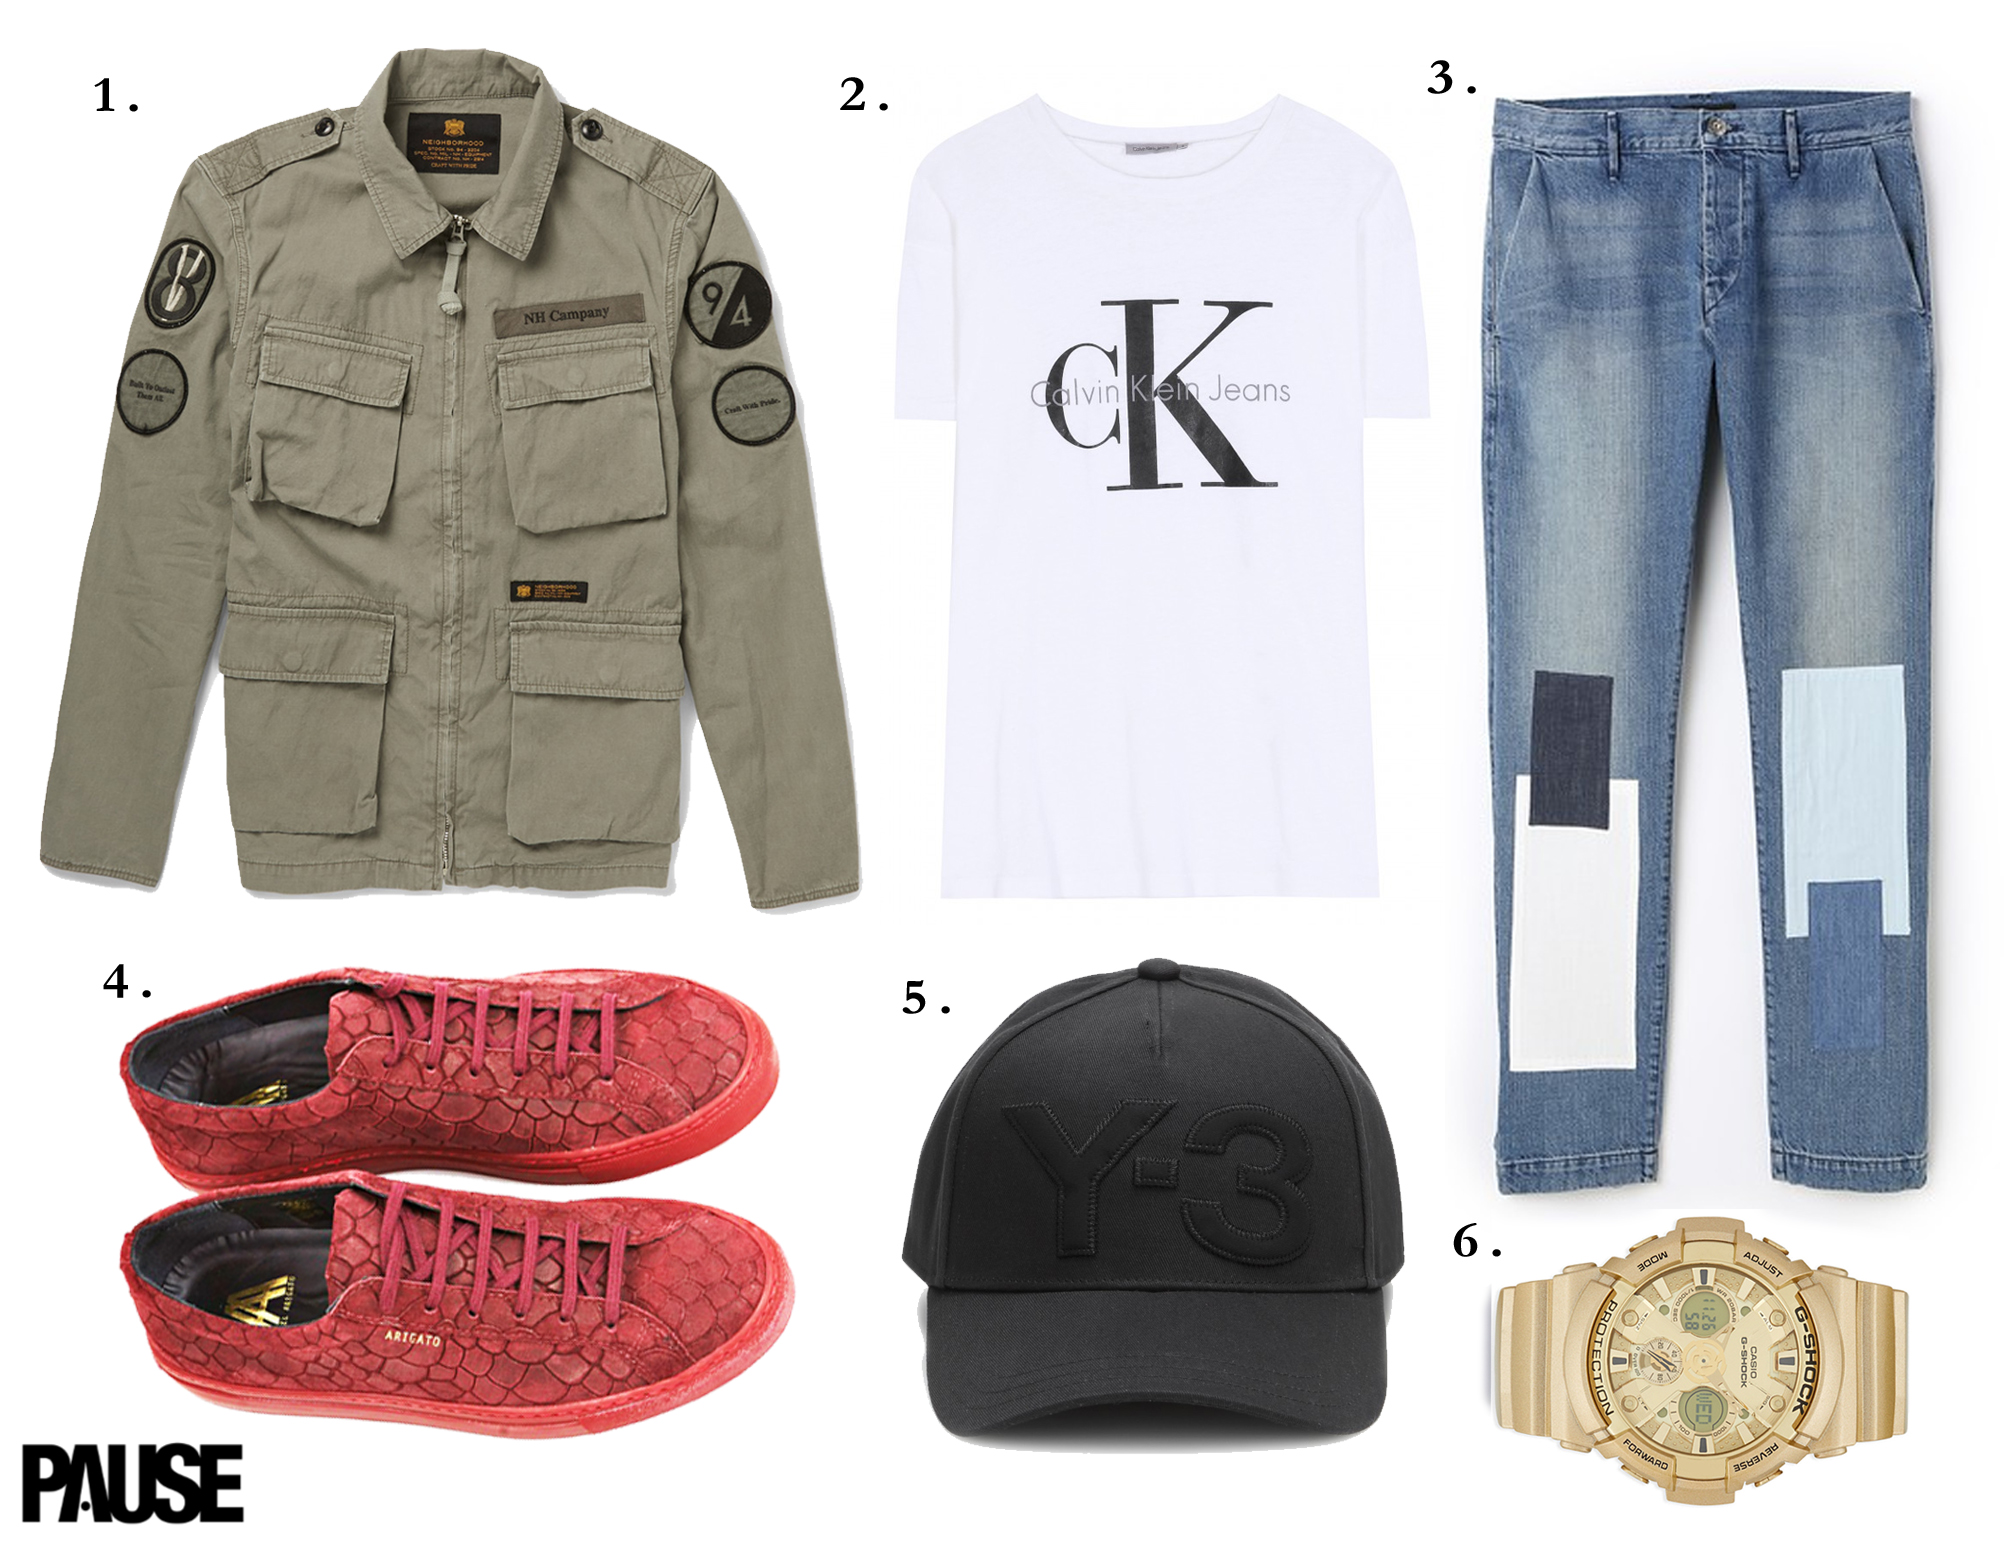 PAUSE Outfit Of The Week: Easy-going